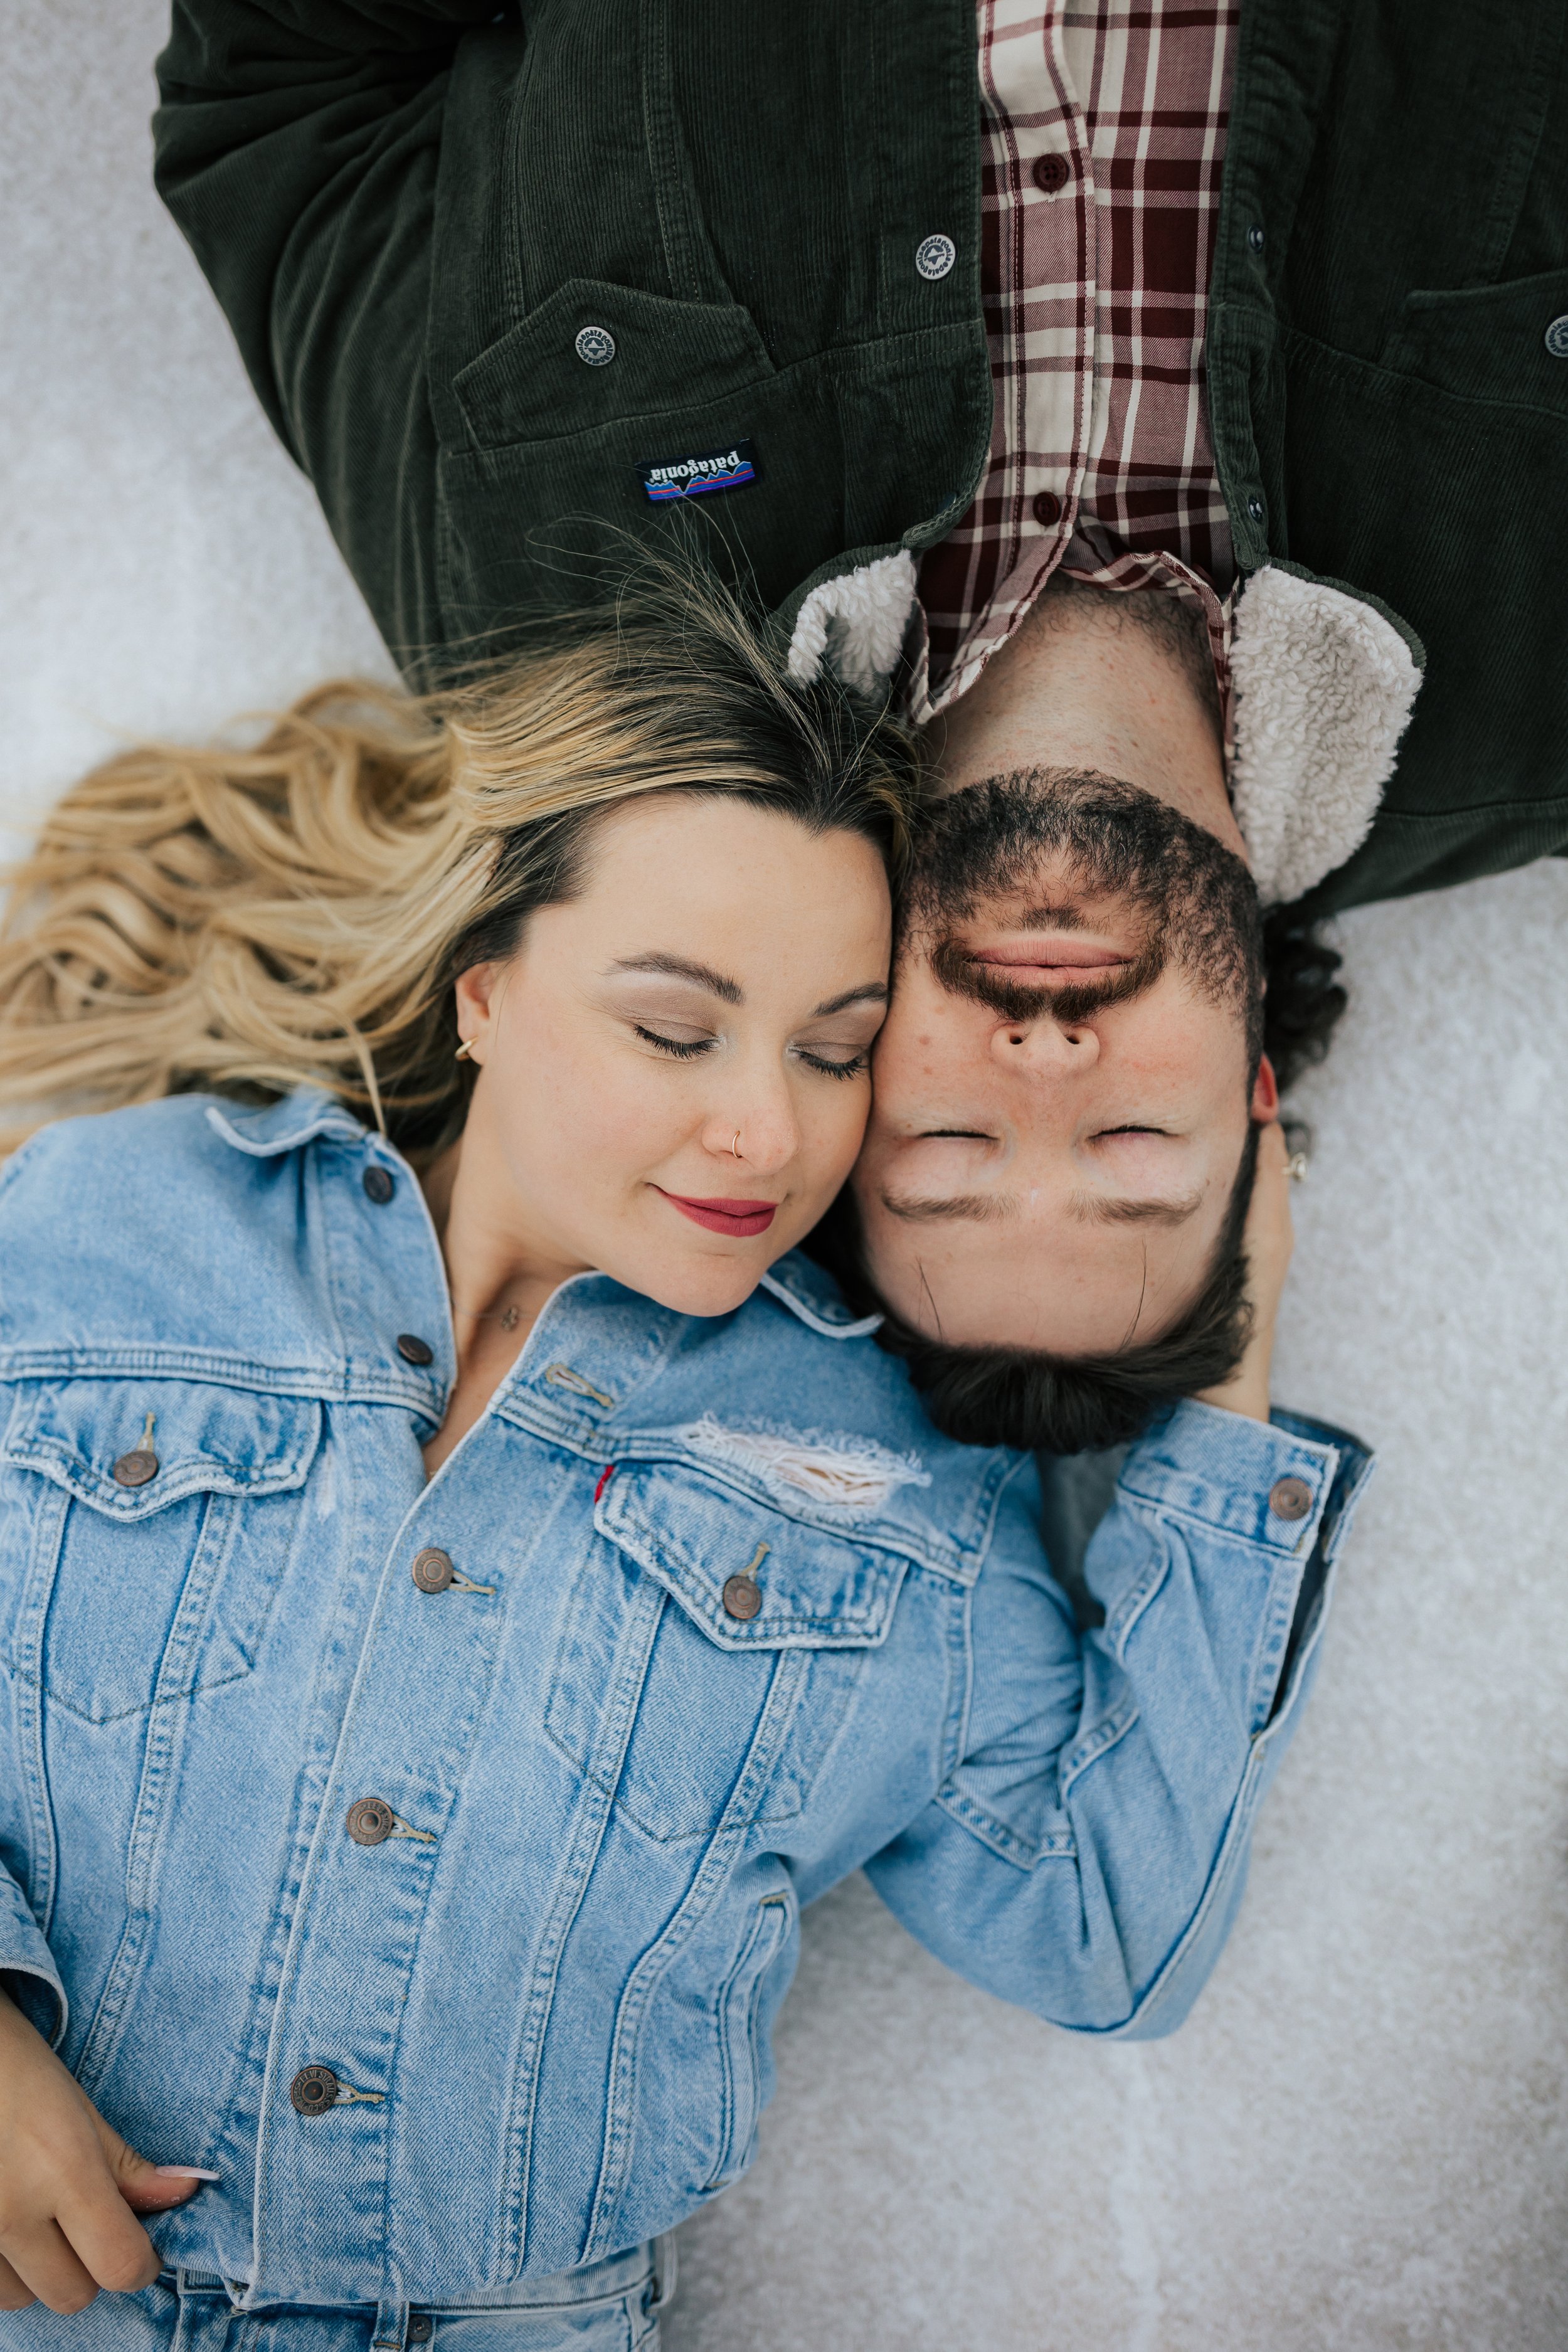  An engaged couple lays down together in opposite directions with their heads touching on the Bonneville Salt Flats near Wendover, Nevada and Salt Lake City, Utah. The girl is wearing a blue denim jacket and the man is wearing a plaid shirt with a co